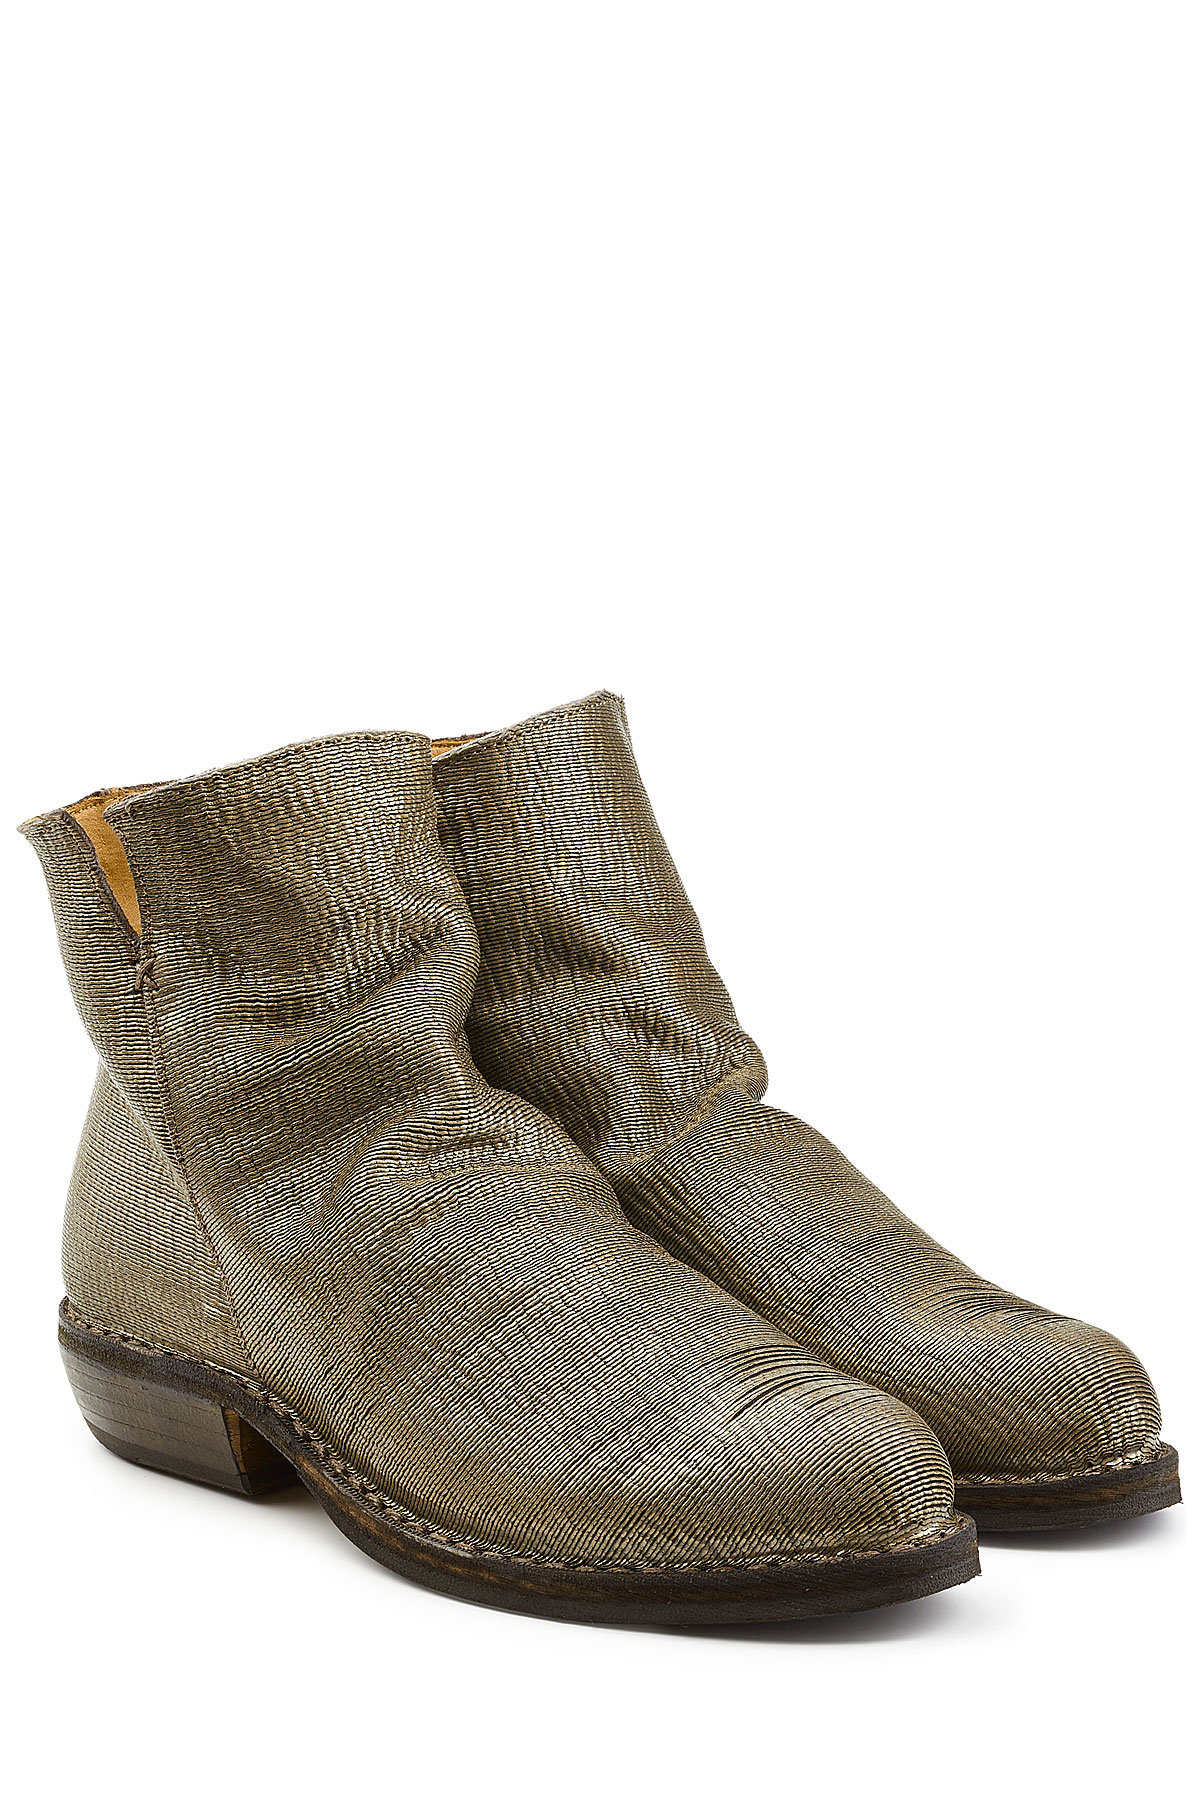 Textured Leather Ankle Boots by Fiorentini + Baker